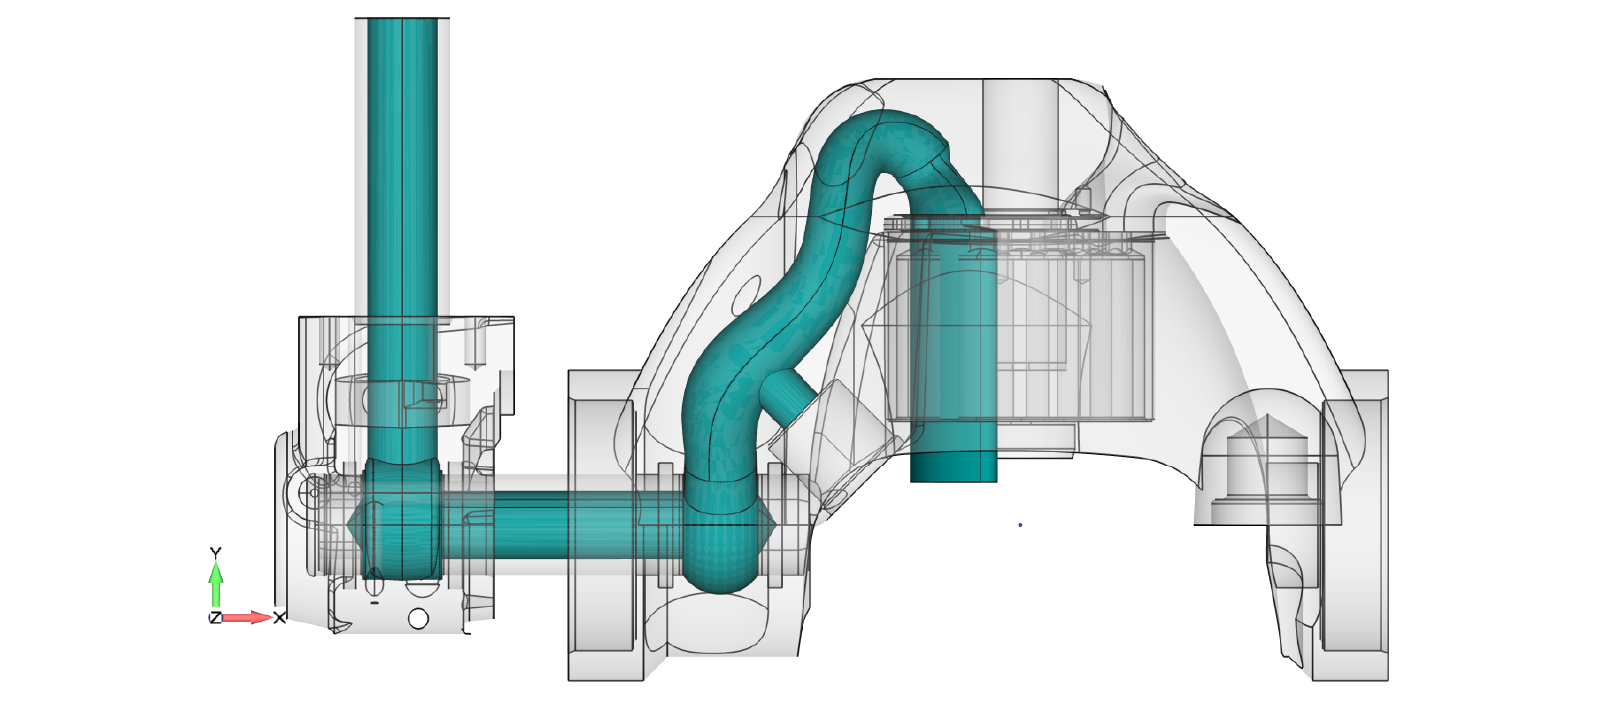 The CAD geometry of the piston pump is shown above. The CFD analysis focused on the internal fluid volume shown in green while the FEA focused on the cast structure shown in gray. 